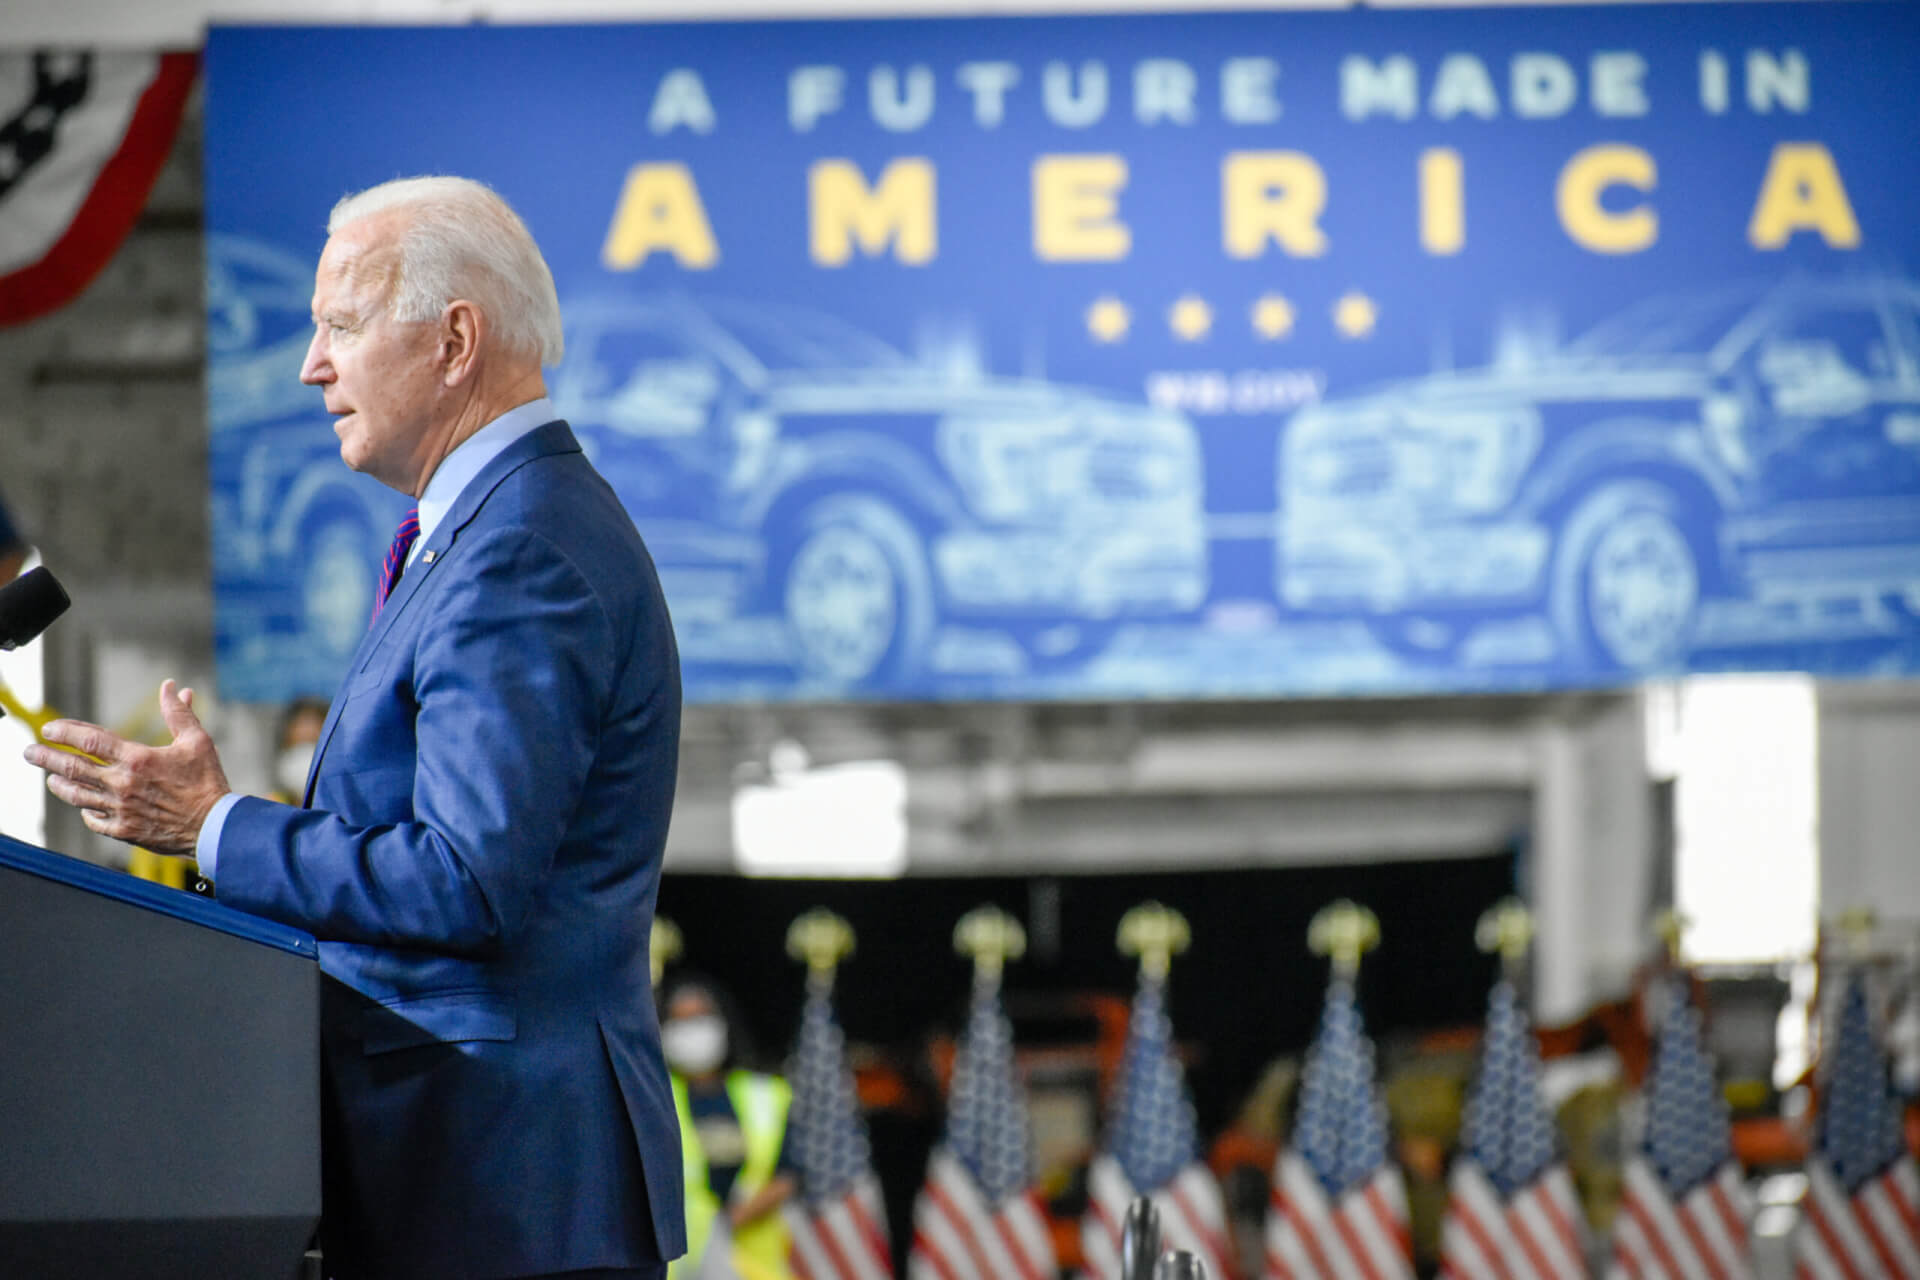 President Joe Biden's Visit to Michigan to Meet with UAW Members: Pro-Union Record and Economic Vision - Archyde